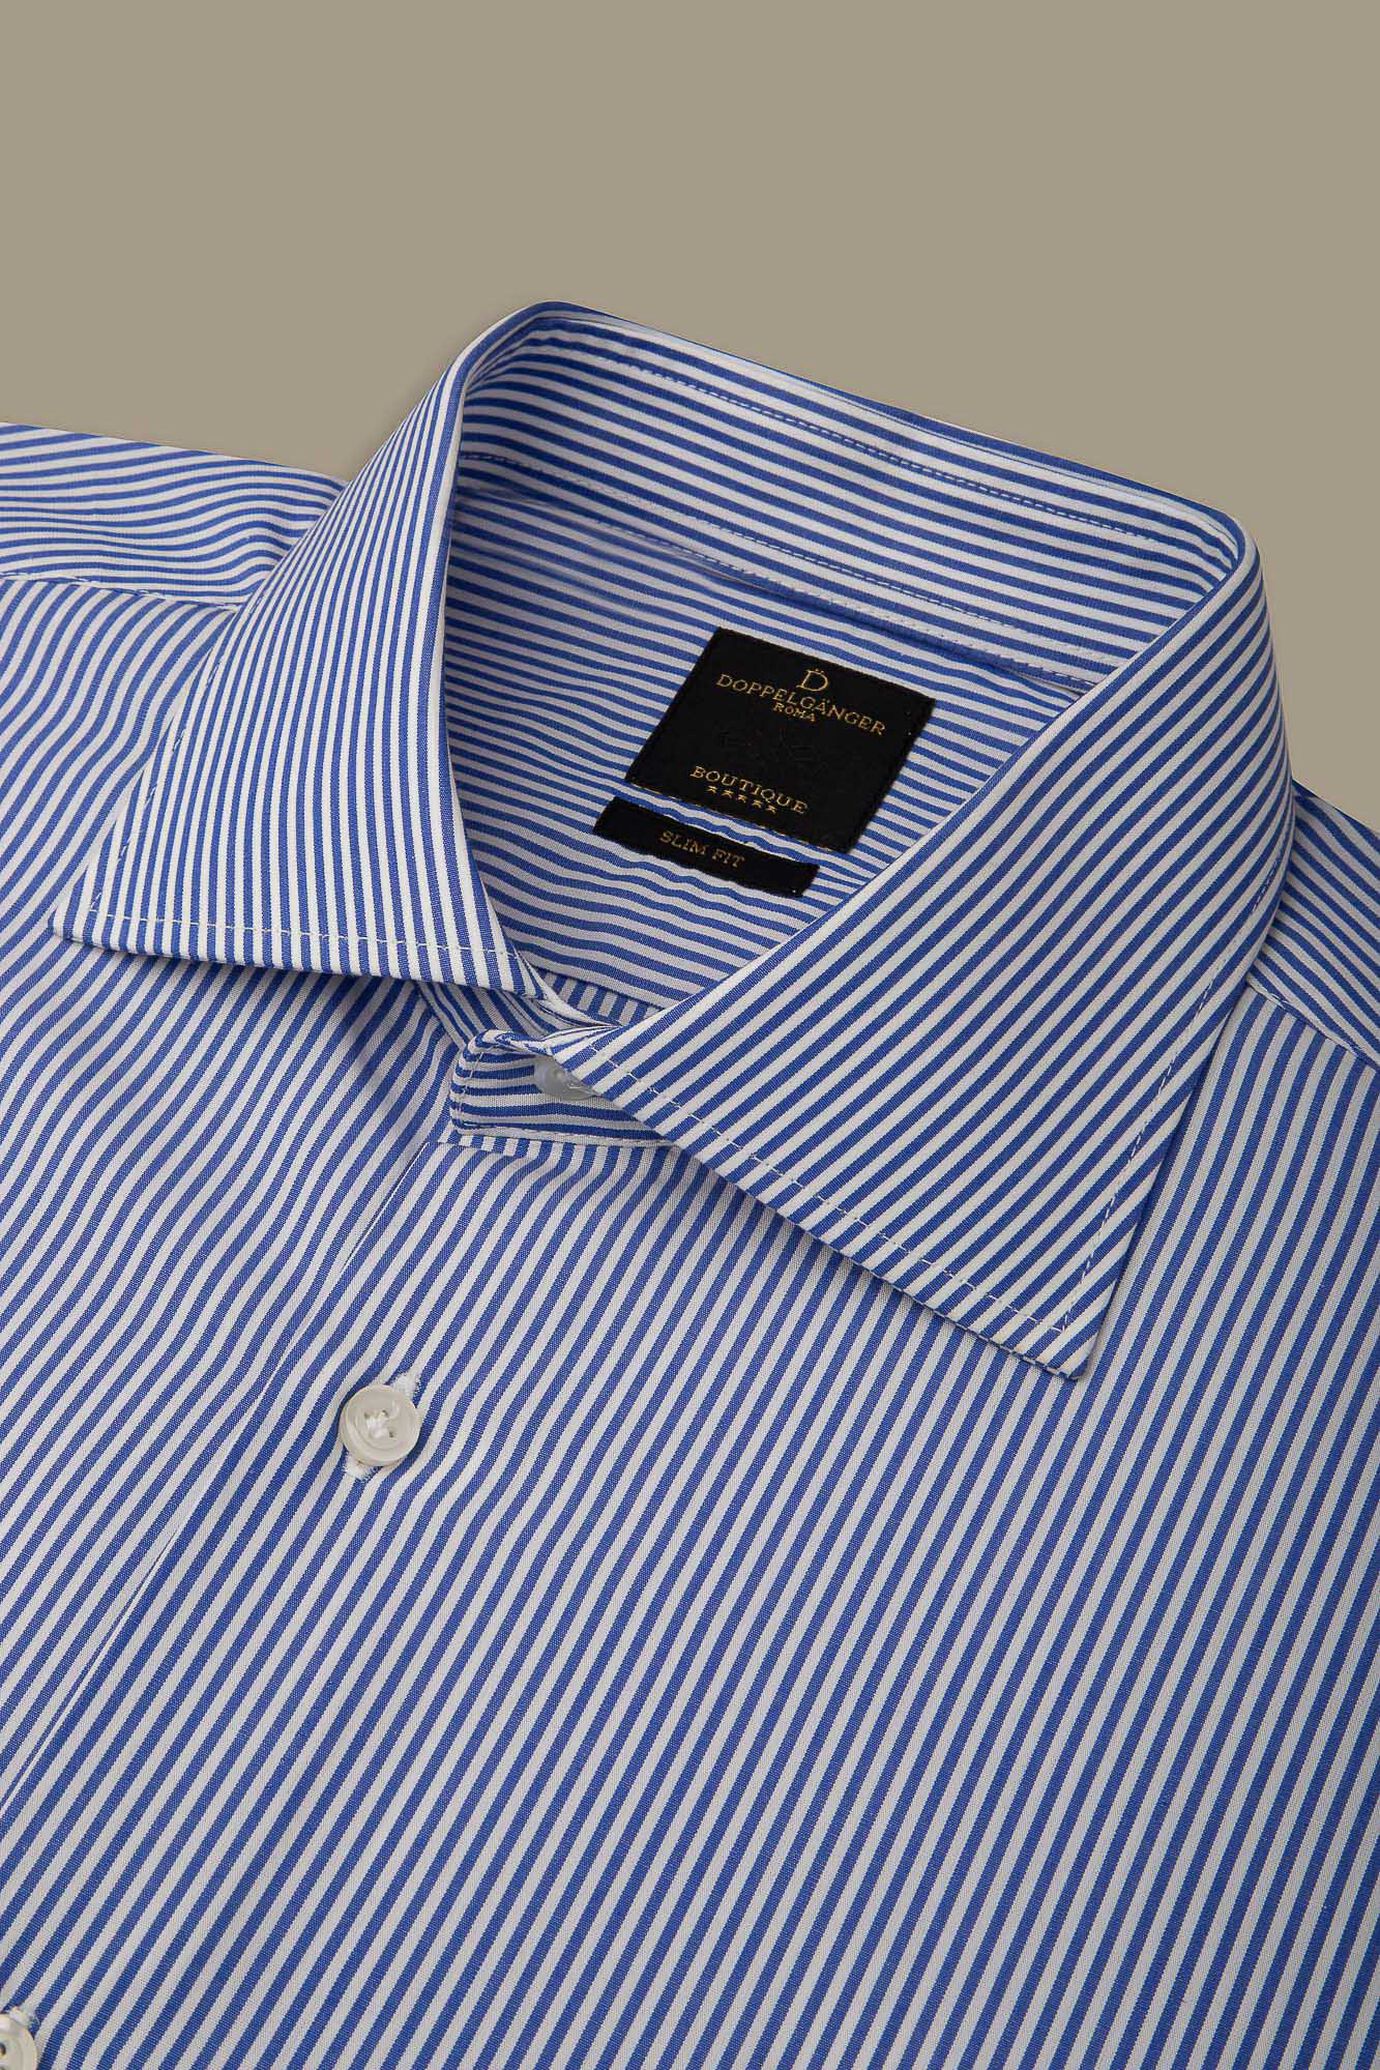 French collar classic shirt yarn dyed stripes image number 0